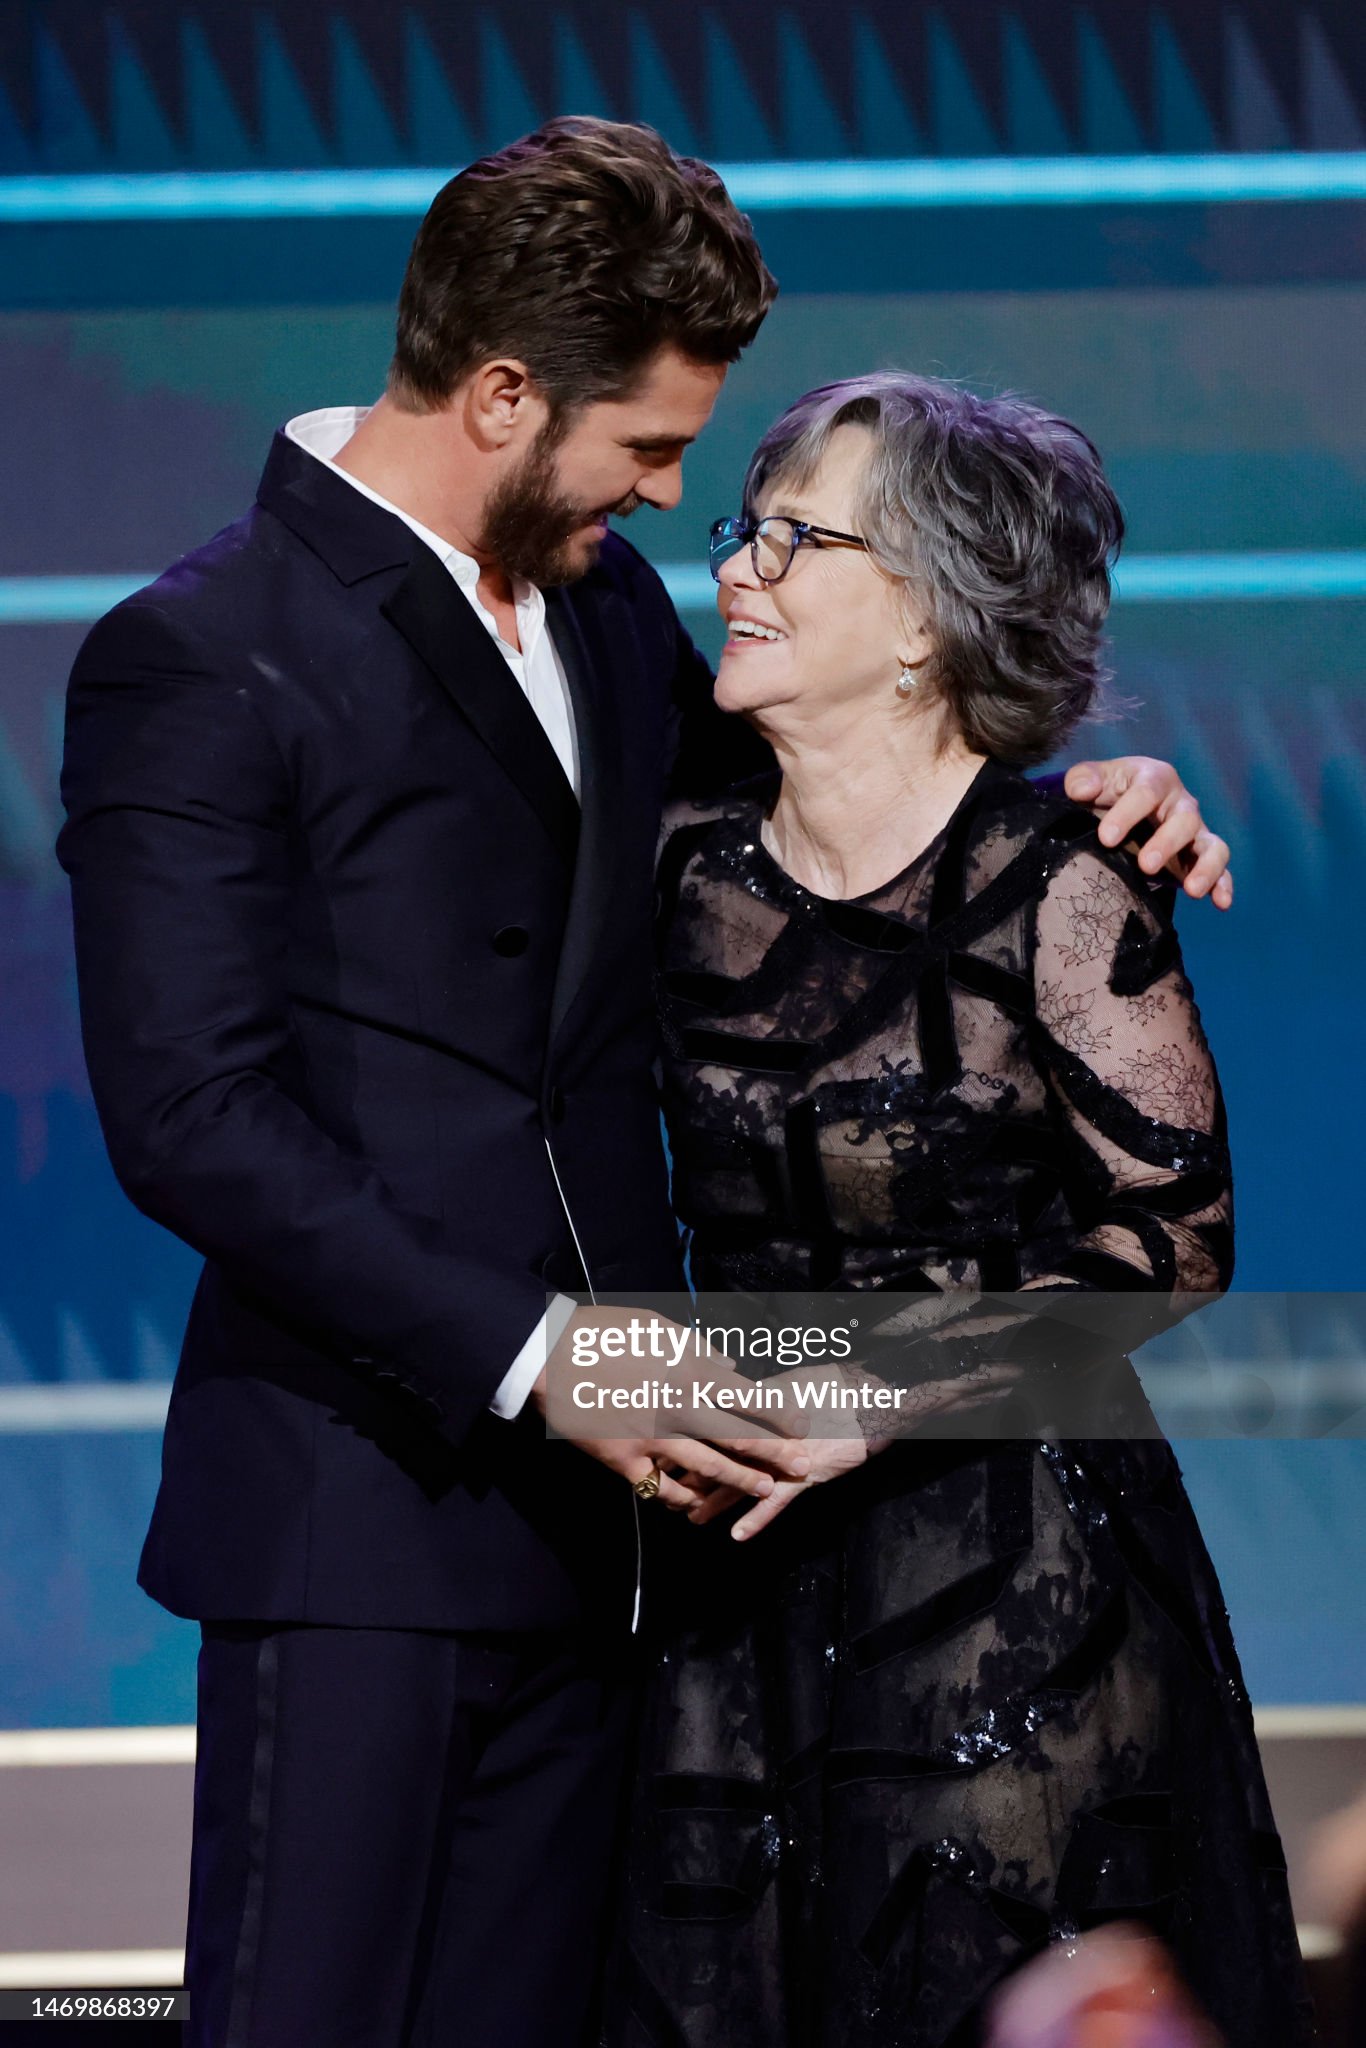 andrew-garfield-presents-the-sag-life-achievement-award-to-honoree-sally-field-onstage-during.jpg